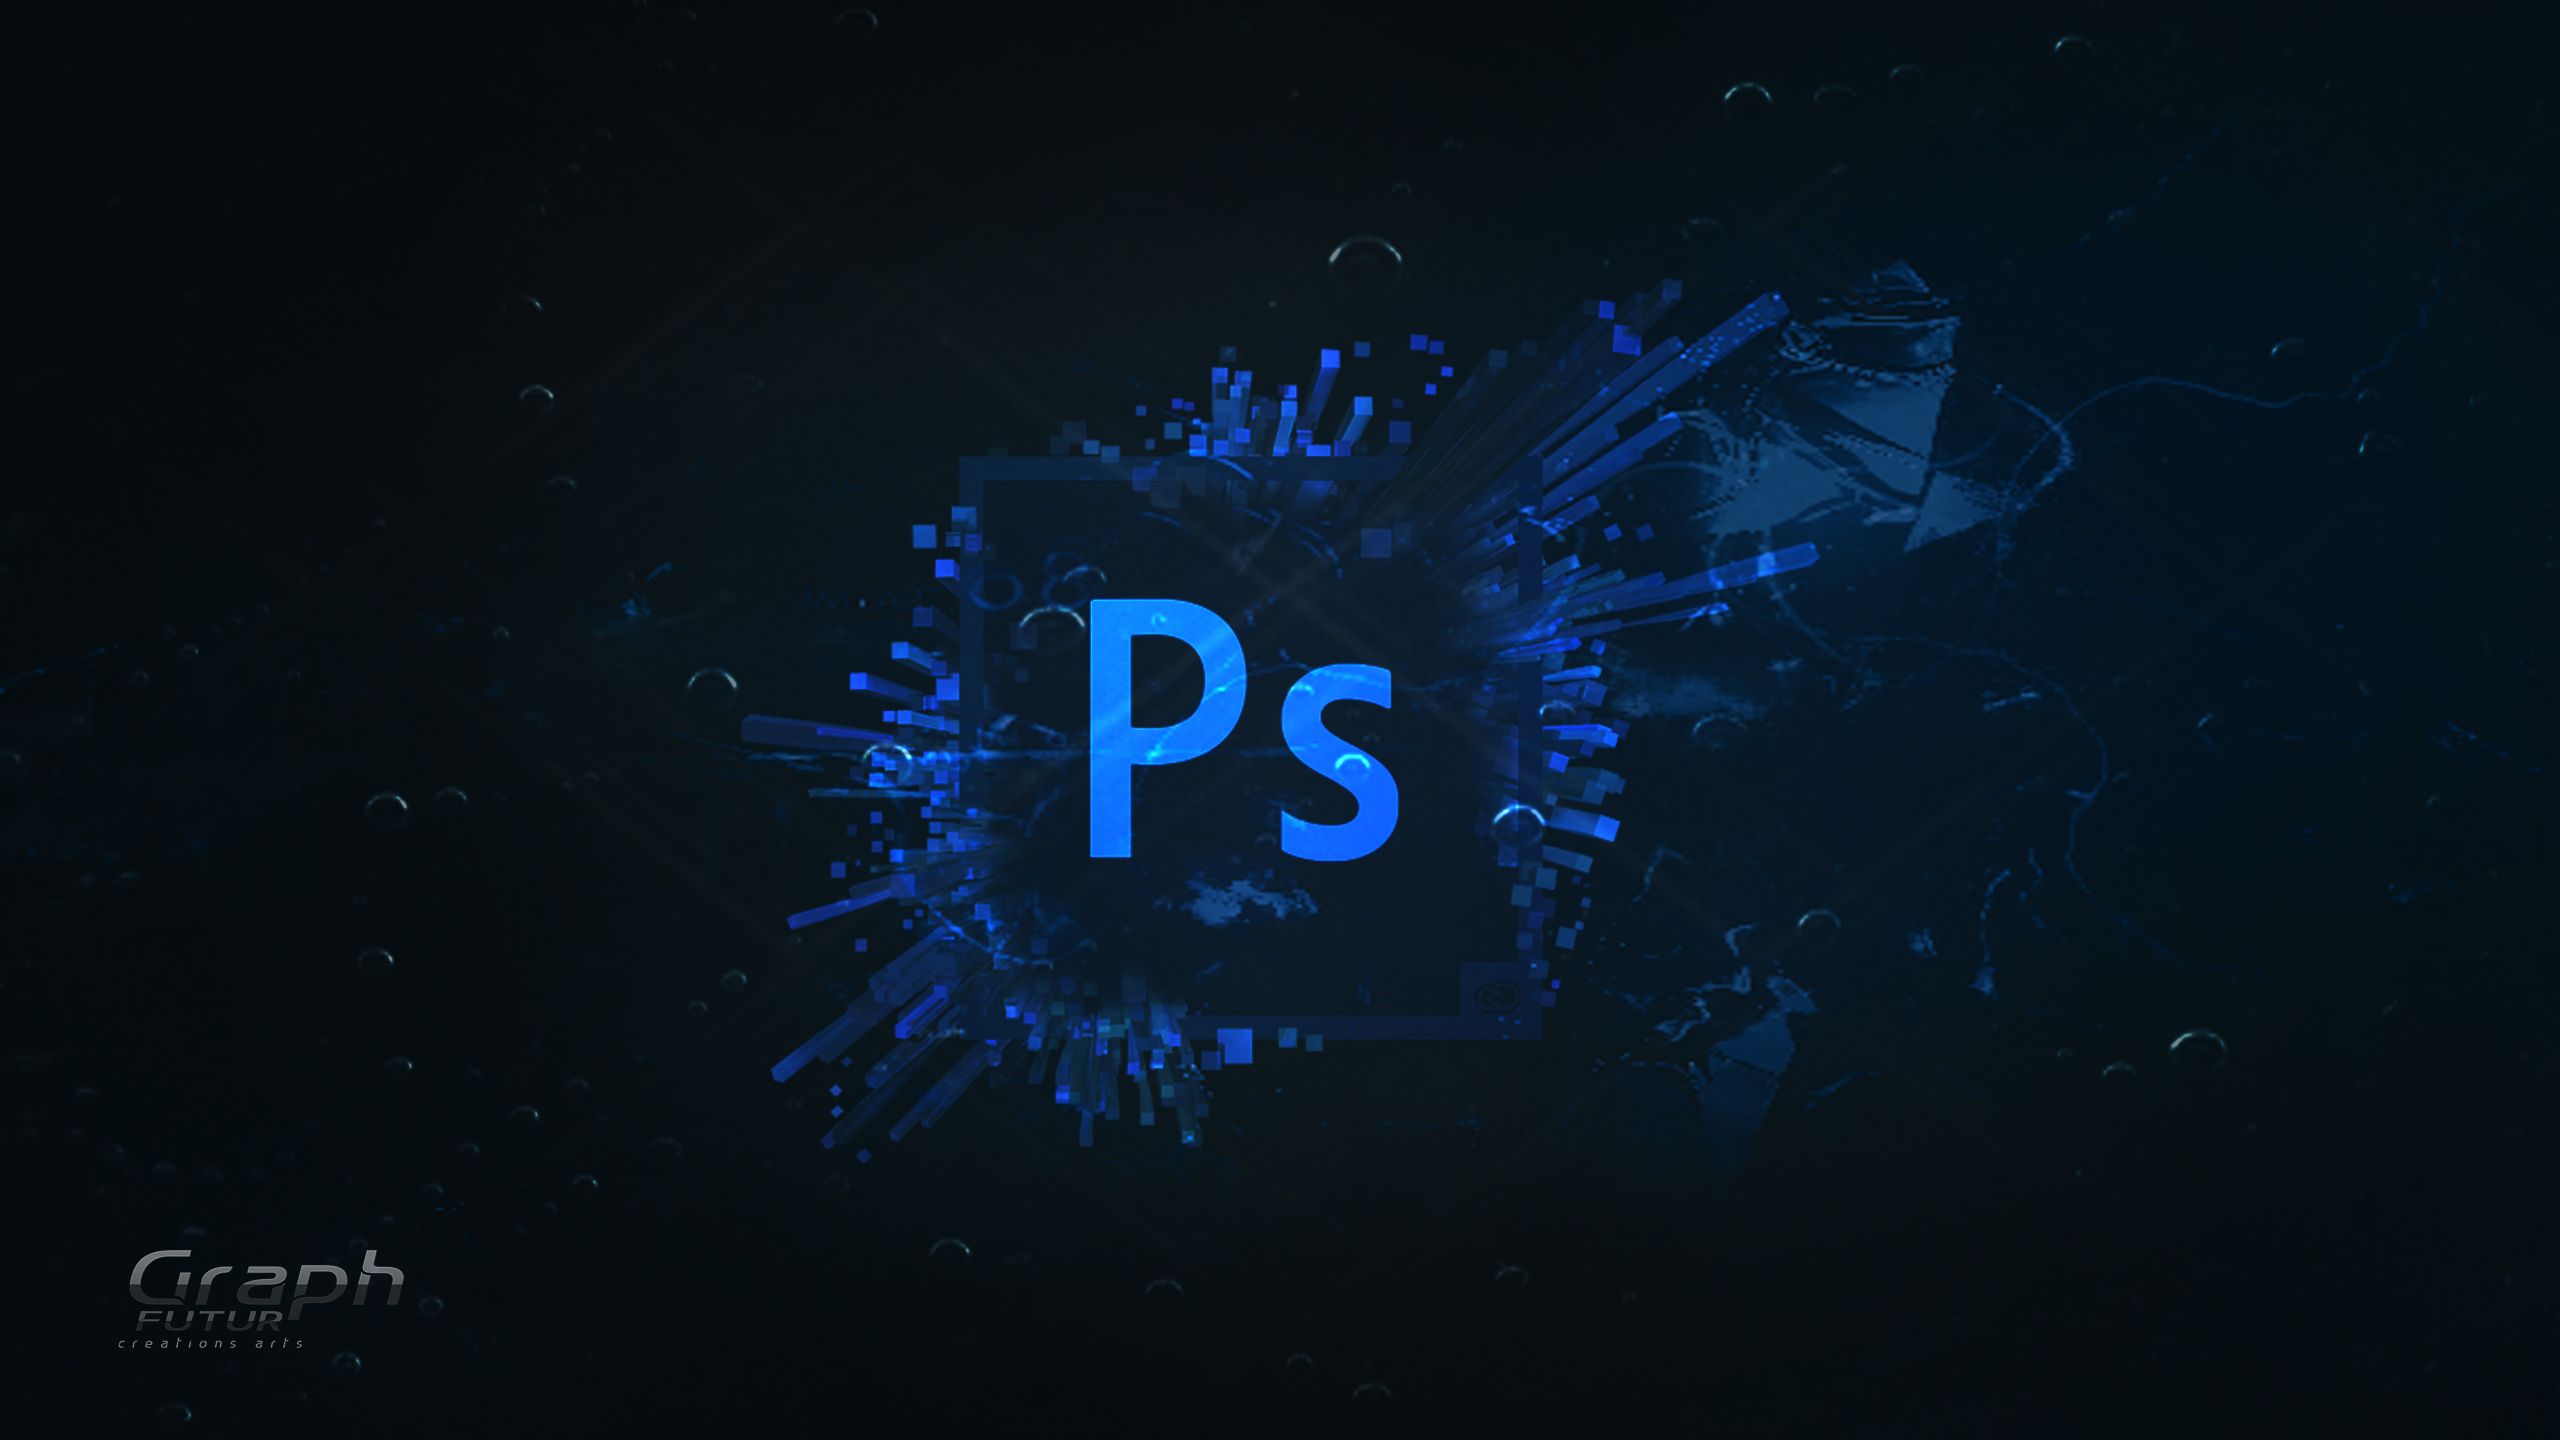 Photoshop Wallpapers